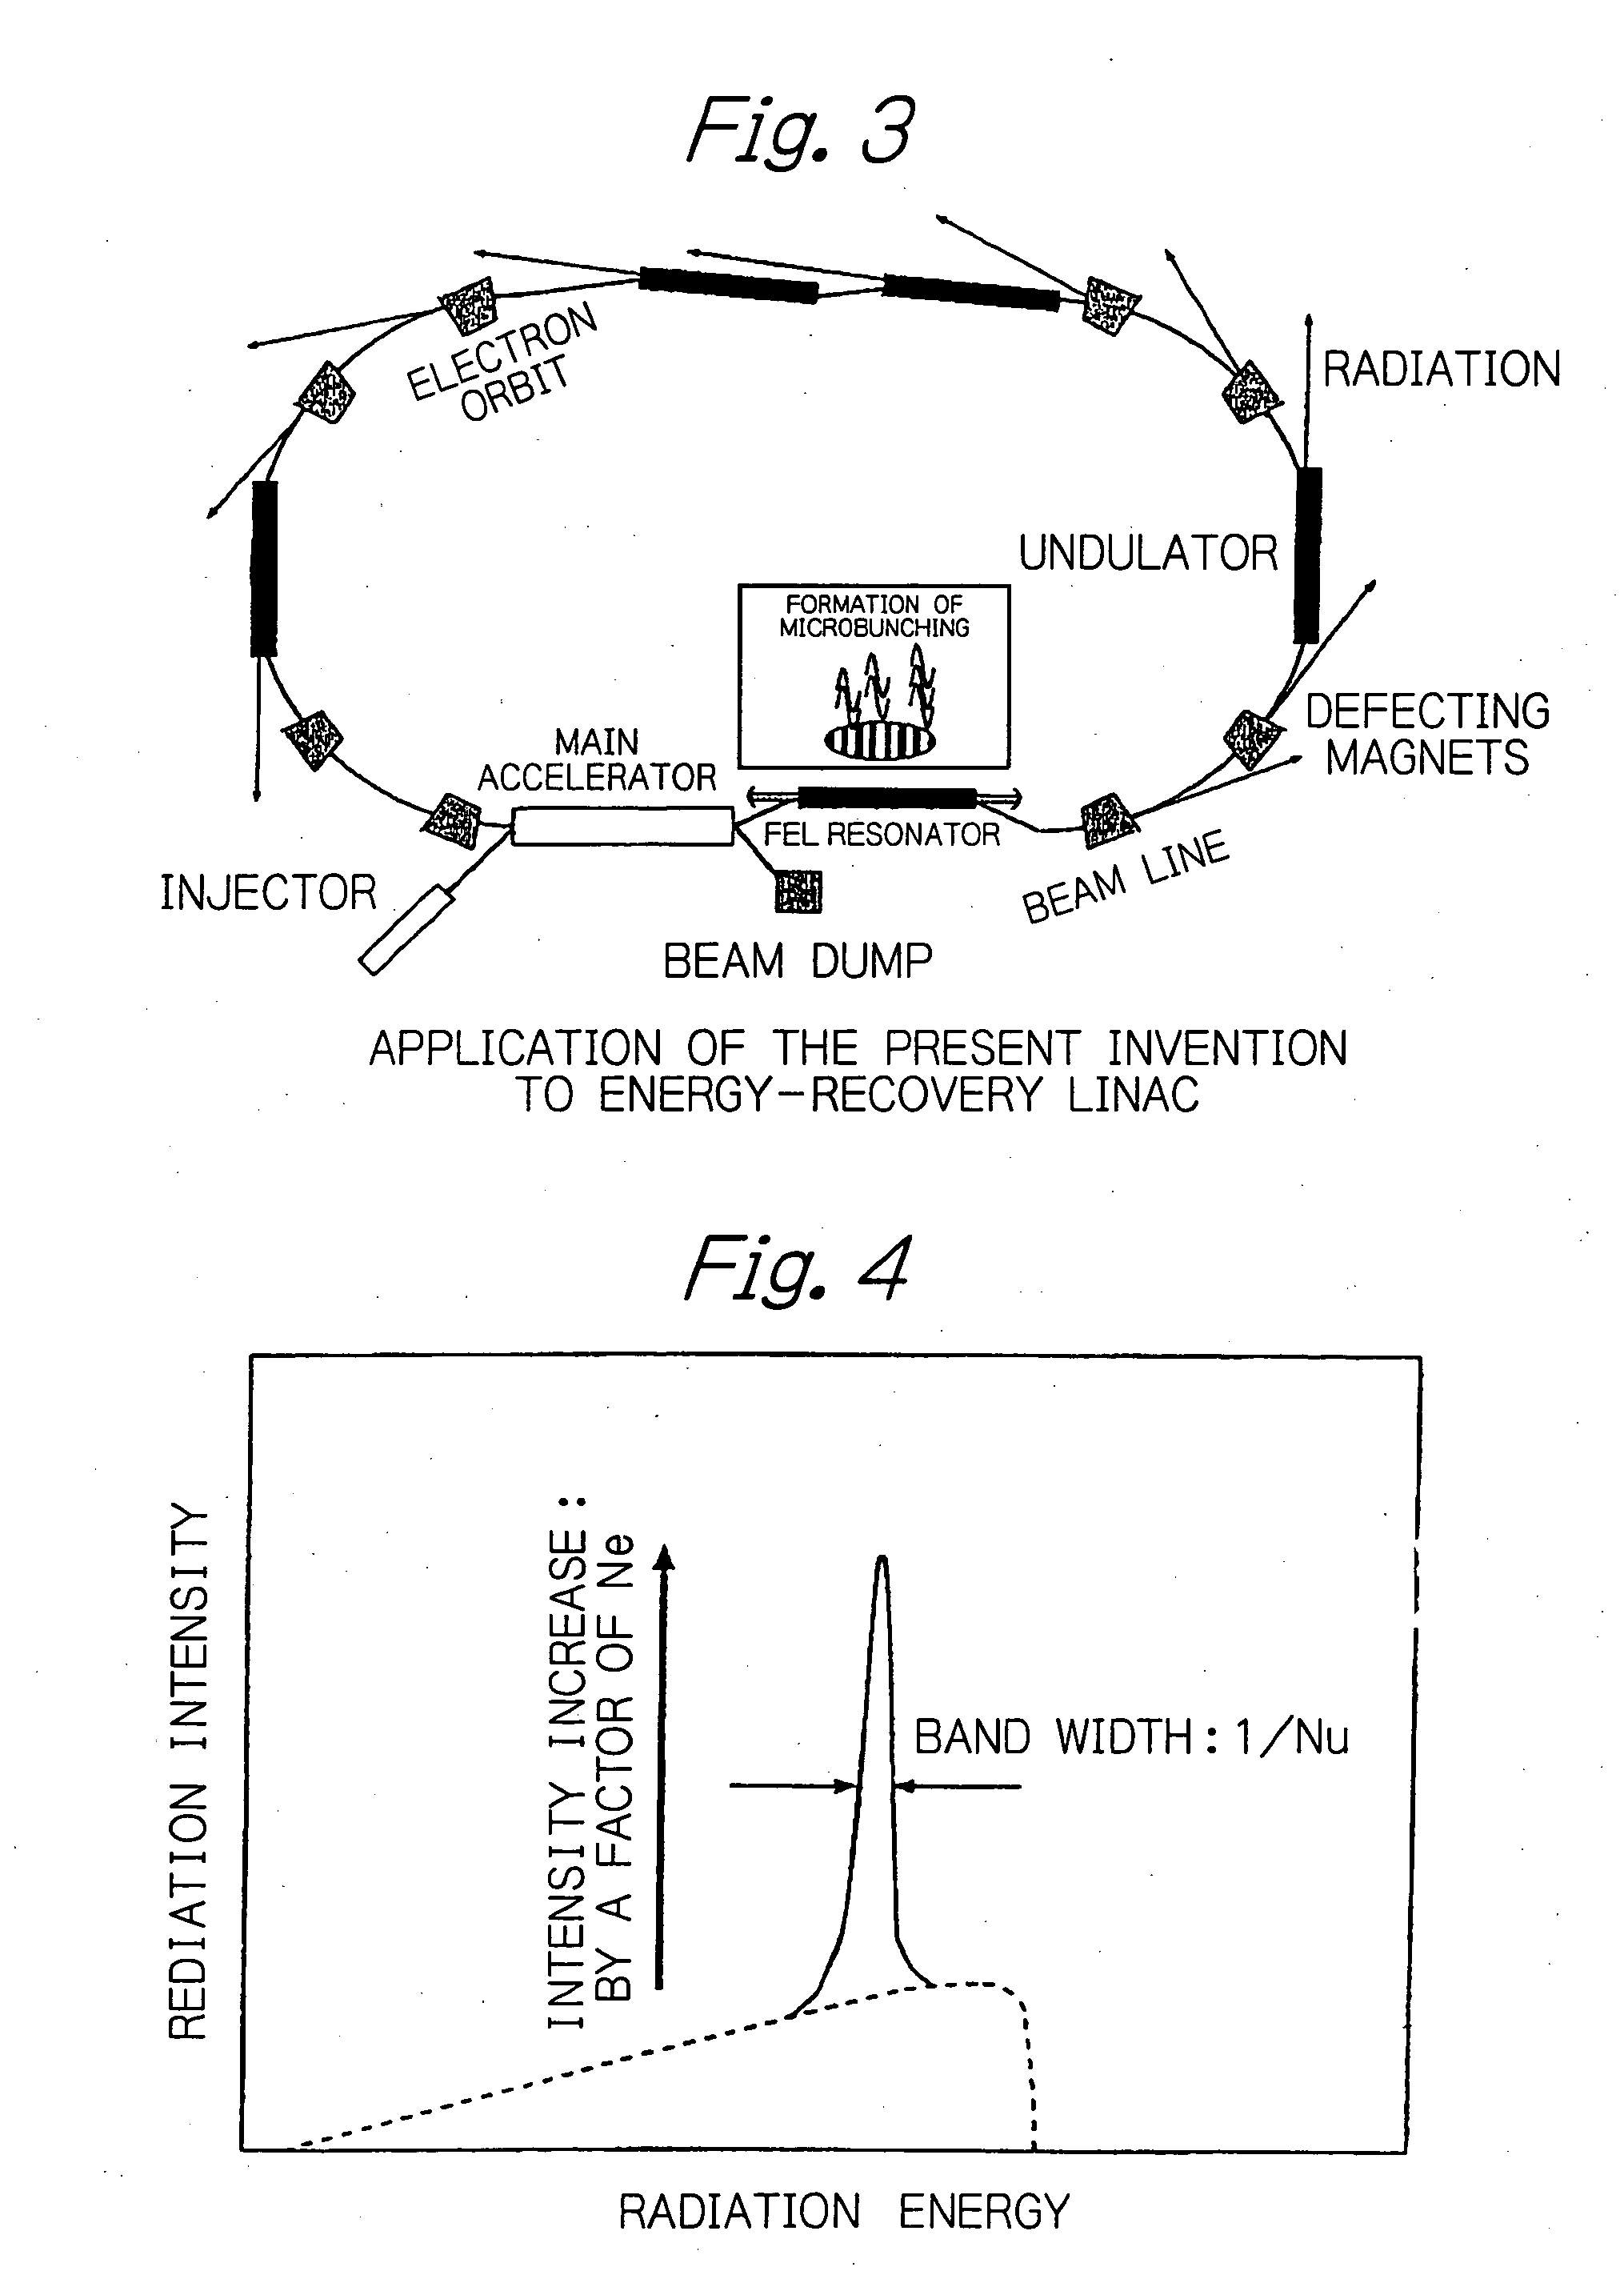 Method for enabling high-brightness, narrow-band orbital radiation to be utilized simultaneously on a plurality of beam lines